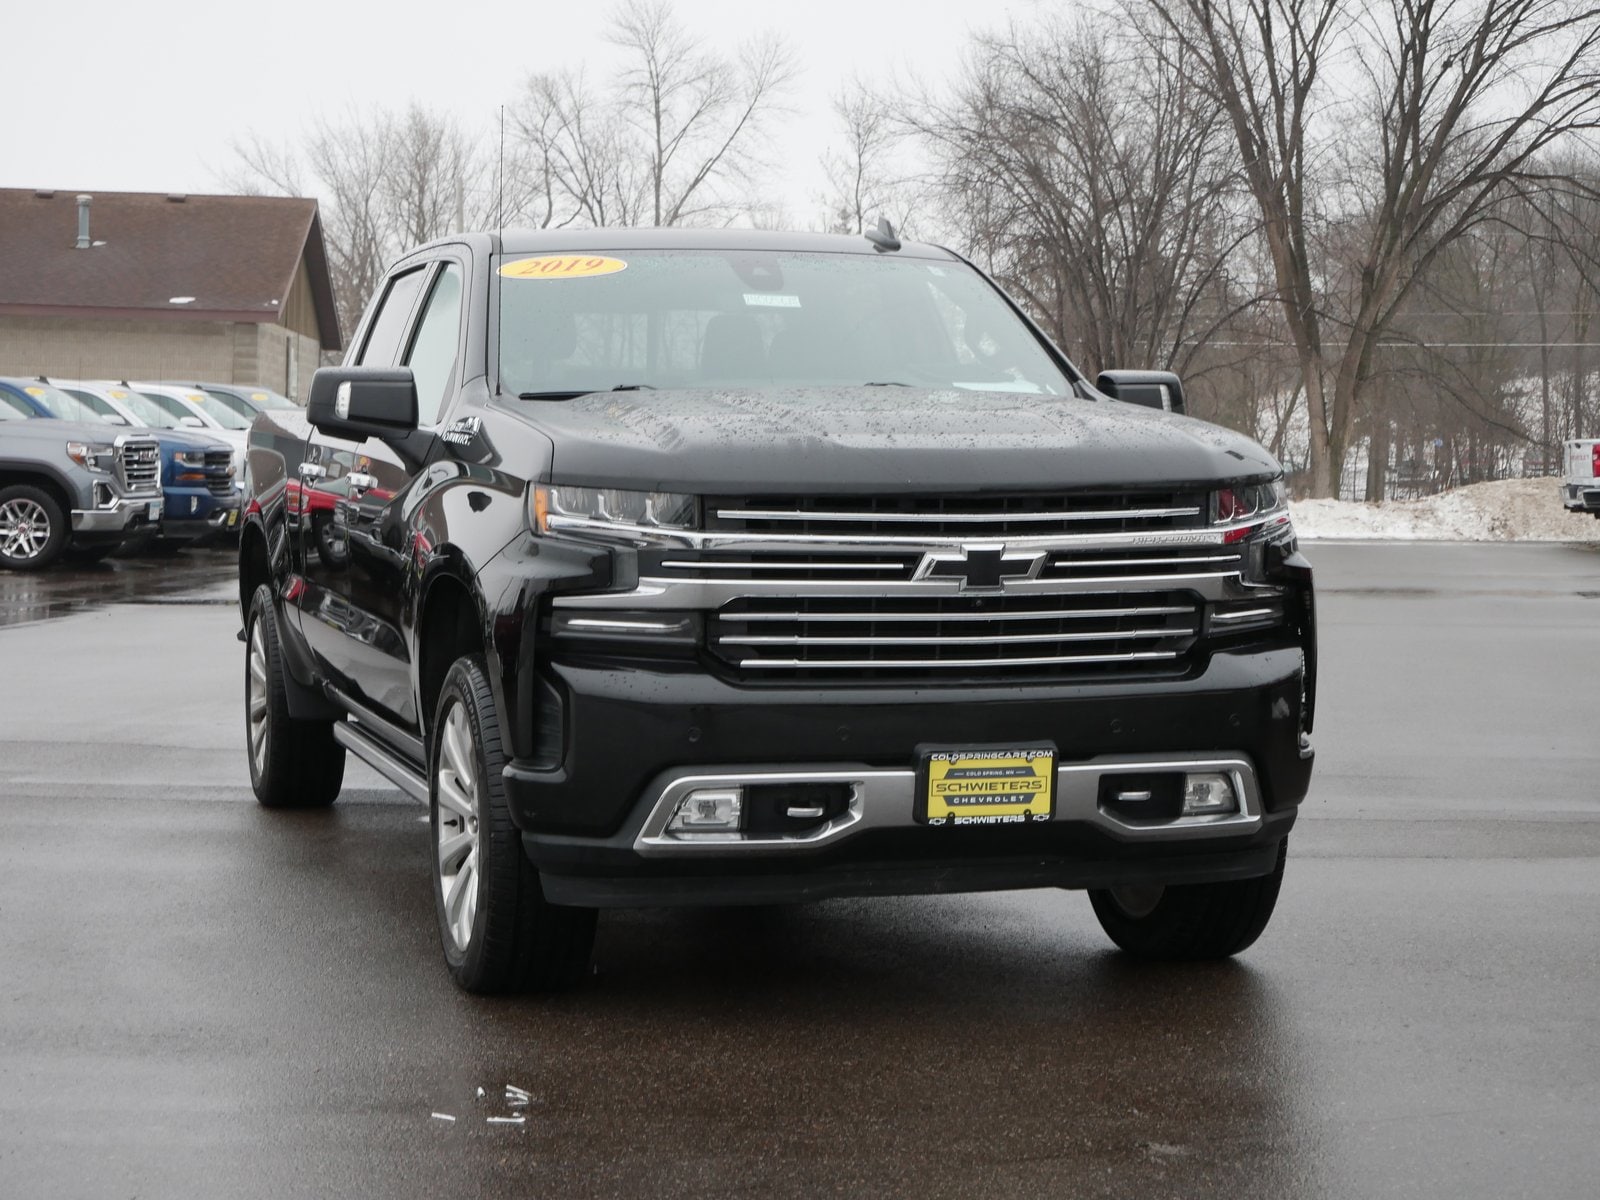 Used 2019 Chevrolet Silverado 1500 High Country with VIN 1GCUYHED4KZ395934 for sale in Cold Spring, Minnesota